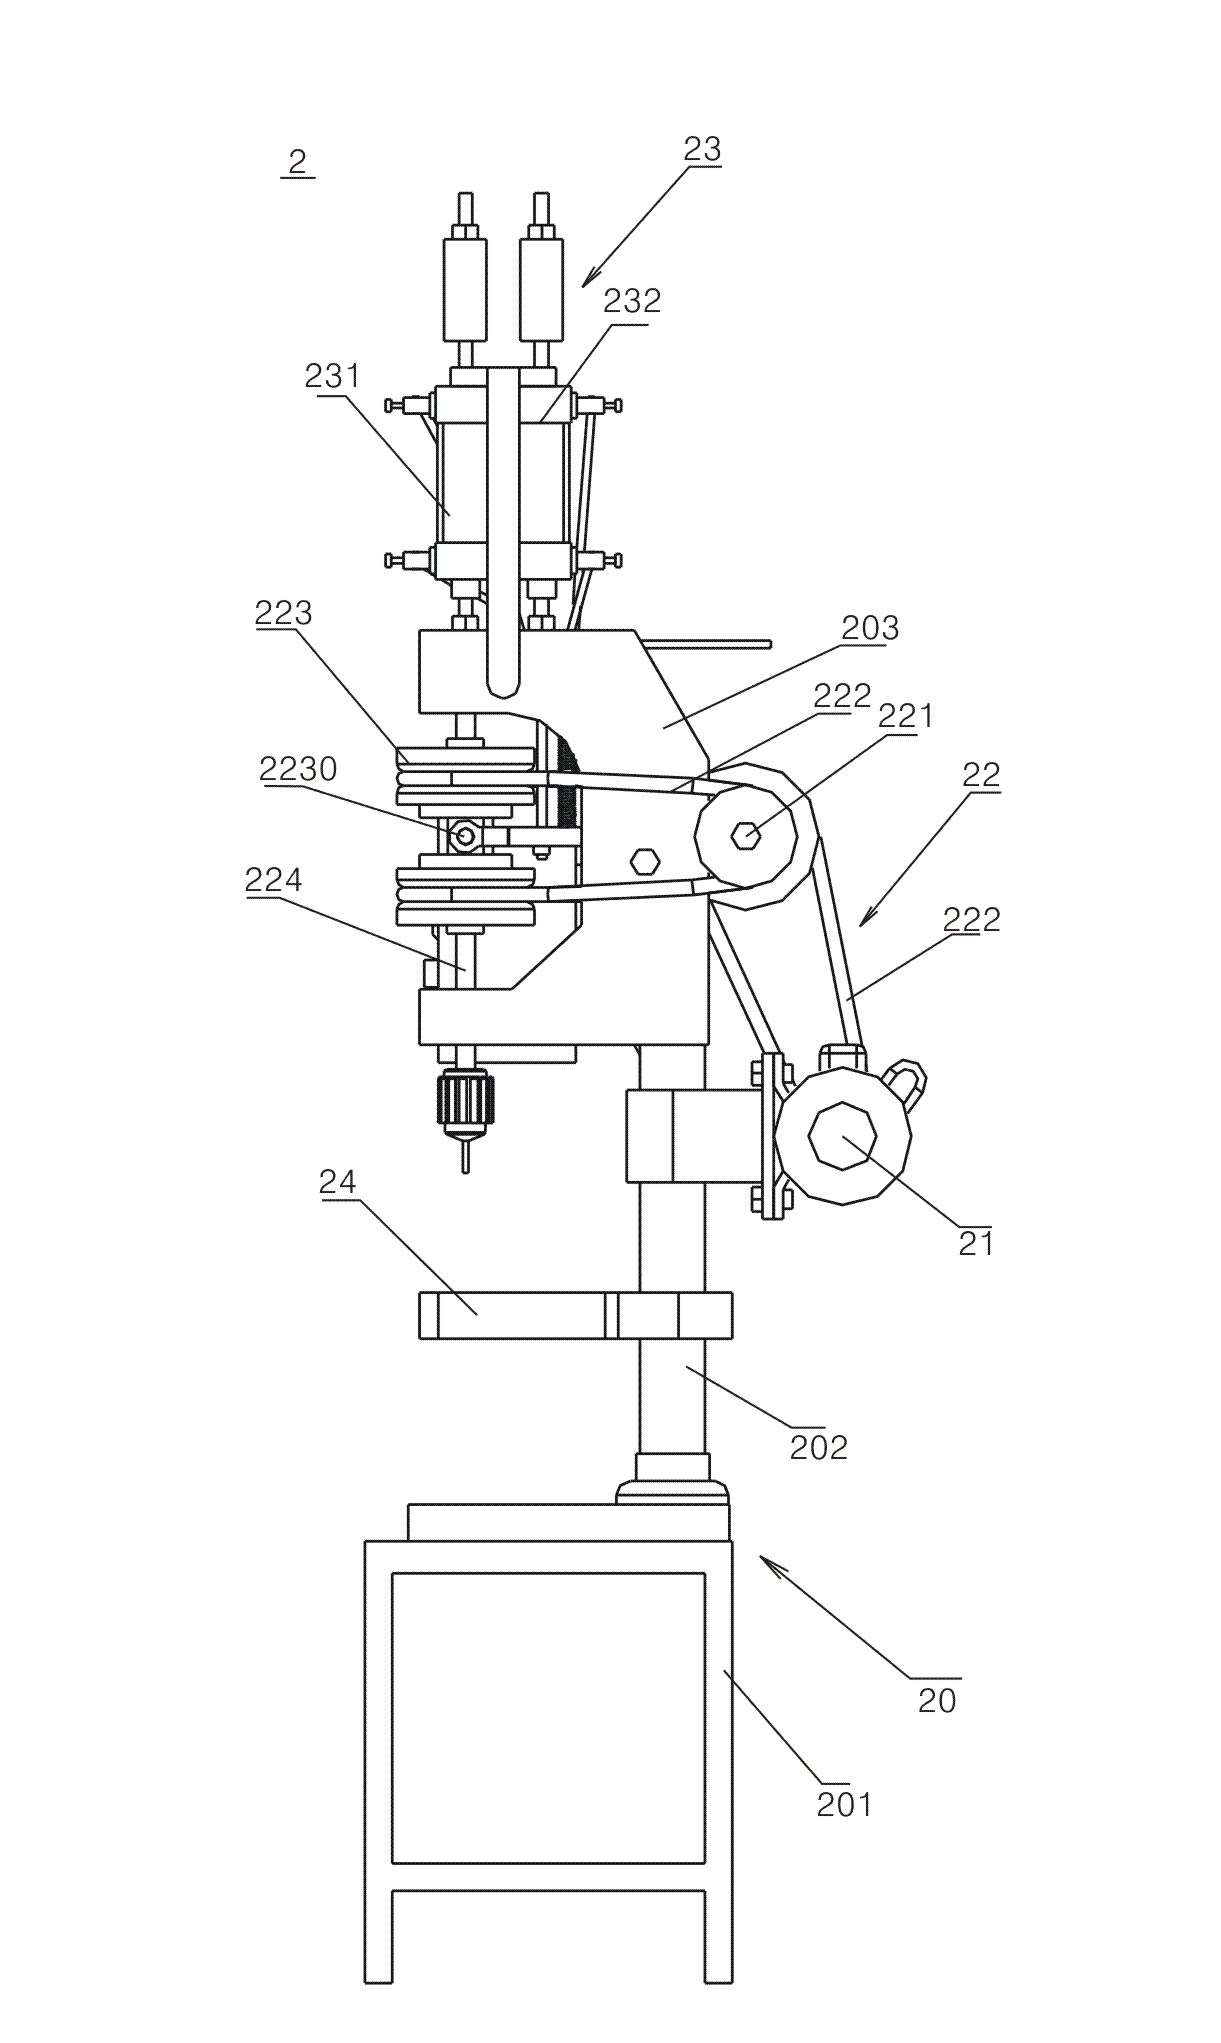 Inner hole toothing device for flexible strips